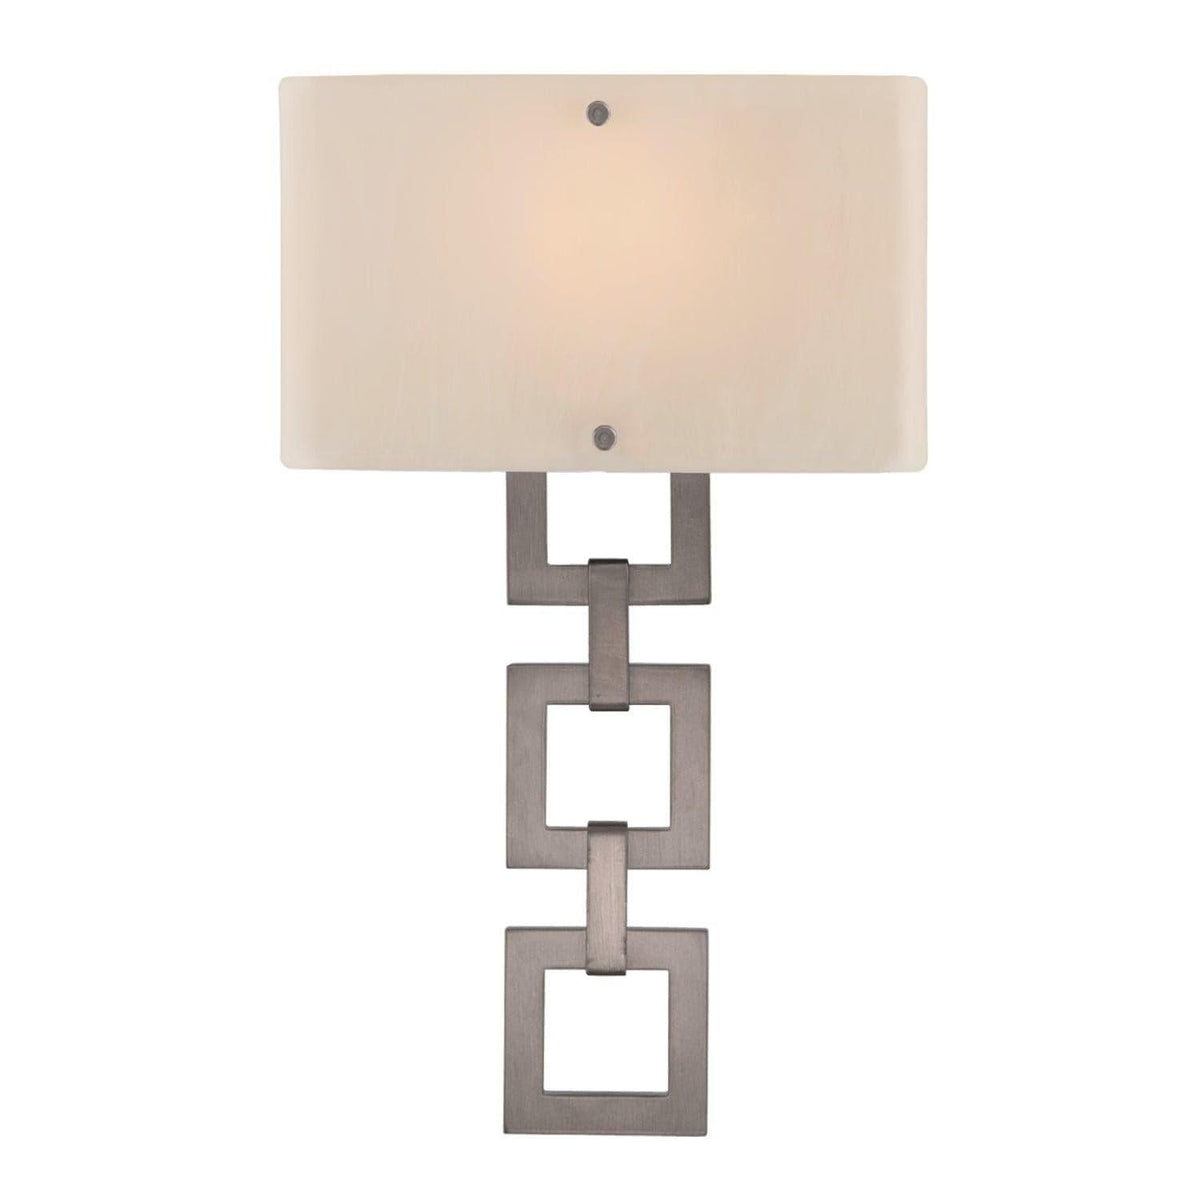 Hammerton Studio - Carlyle Square Link Cover Sconce - CSB0033-0B-SN-IW-E2 | Montreal Lighting & Hardware